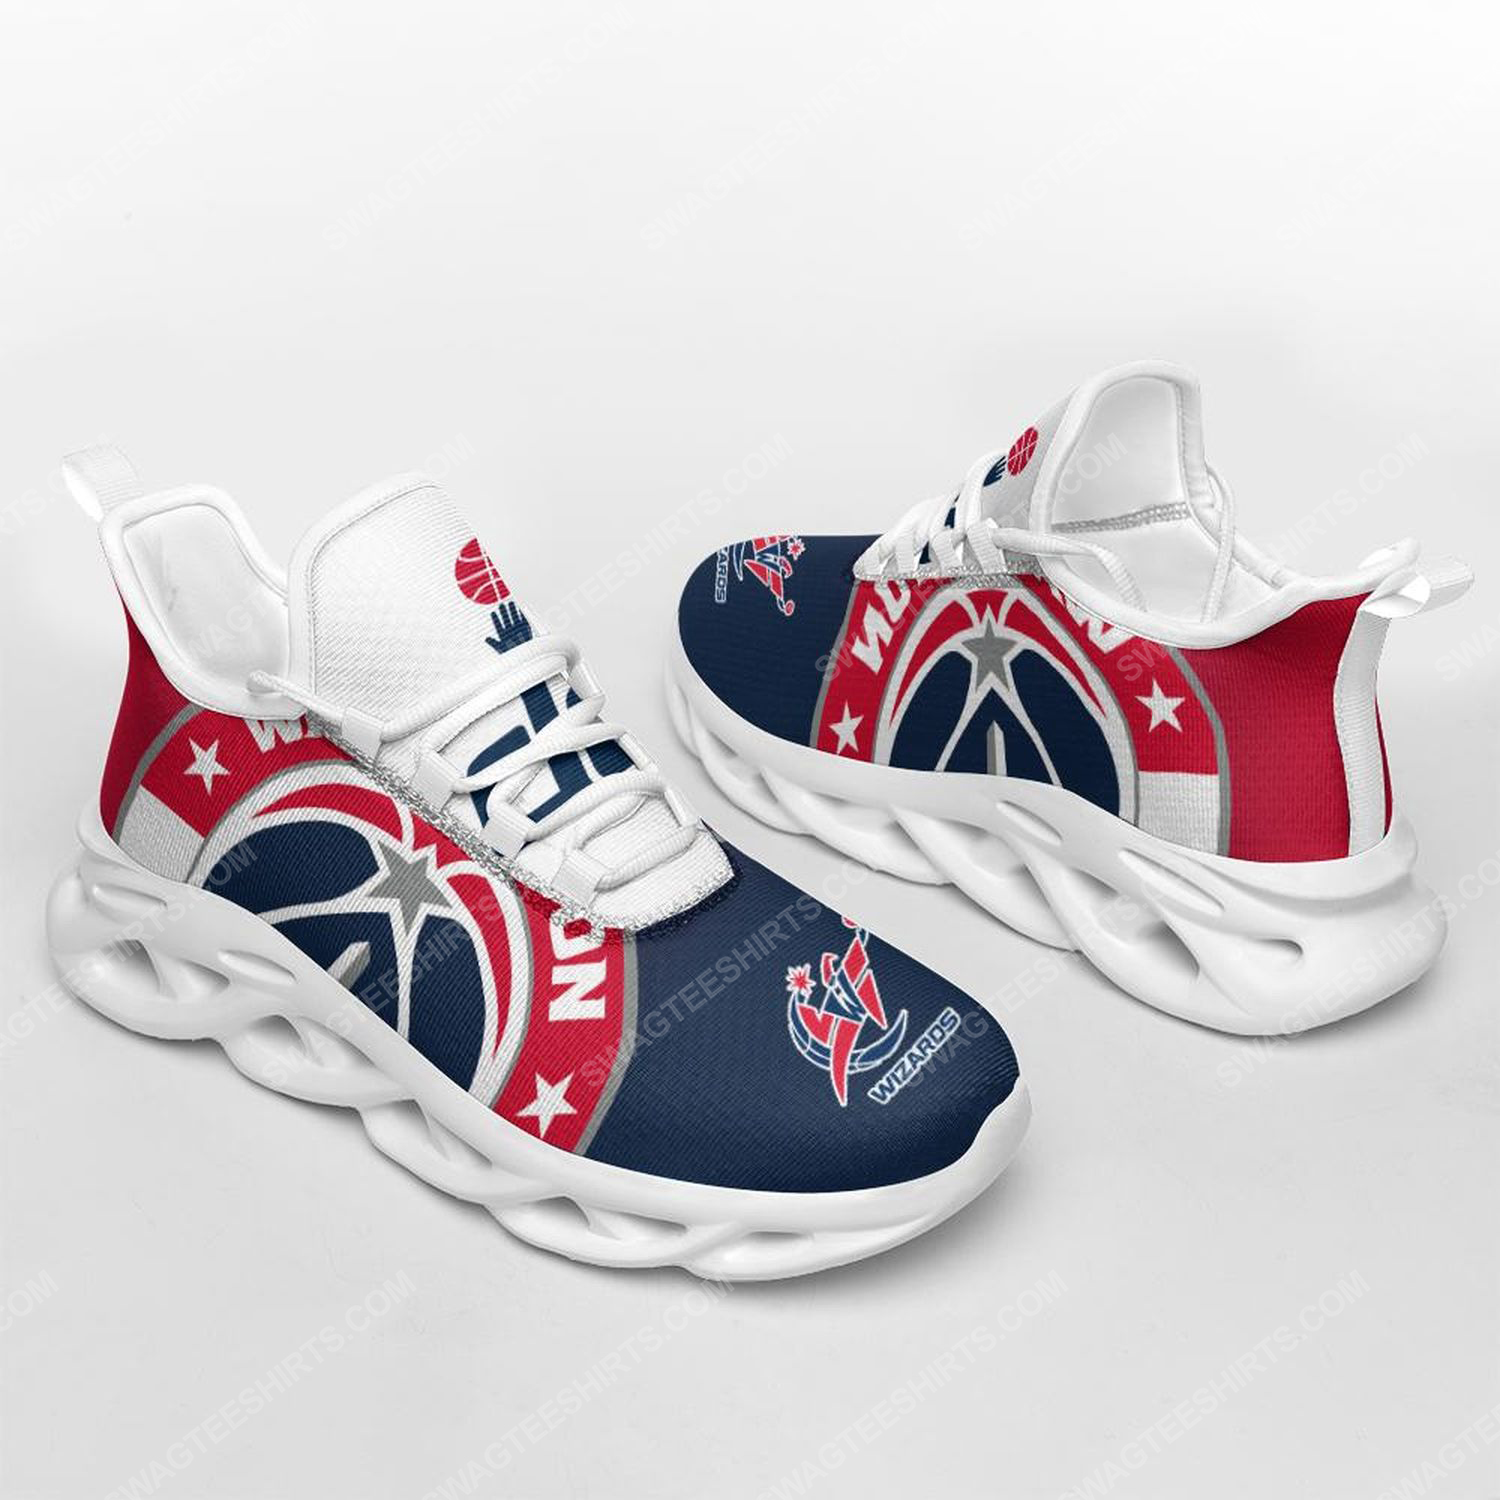 The washington wizards basketball team max soul shoes 1